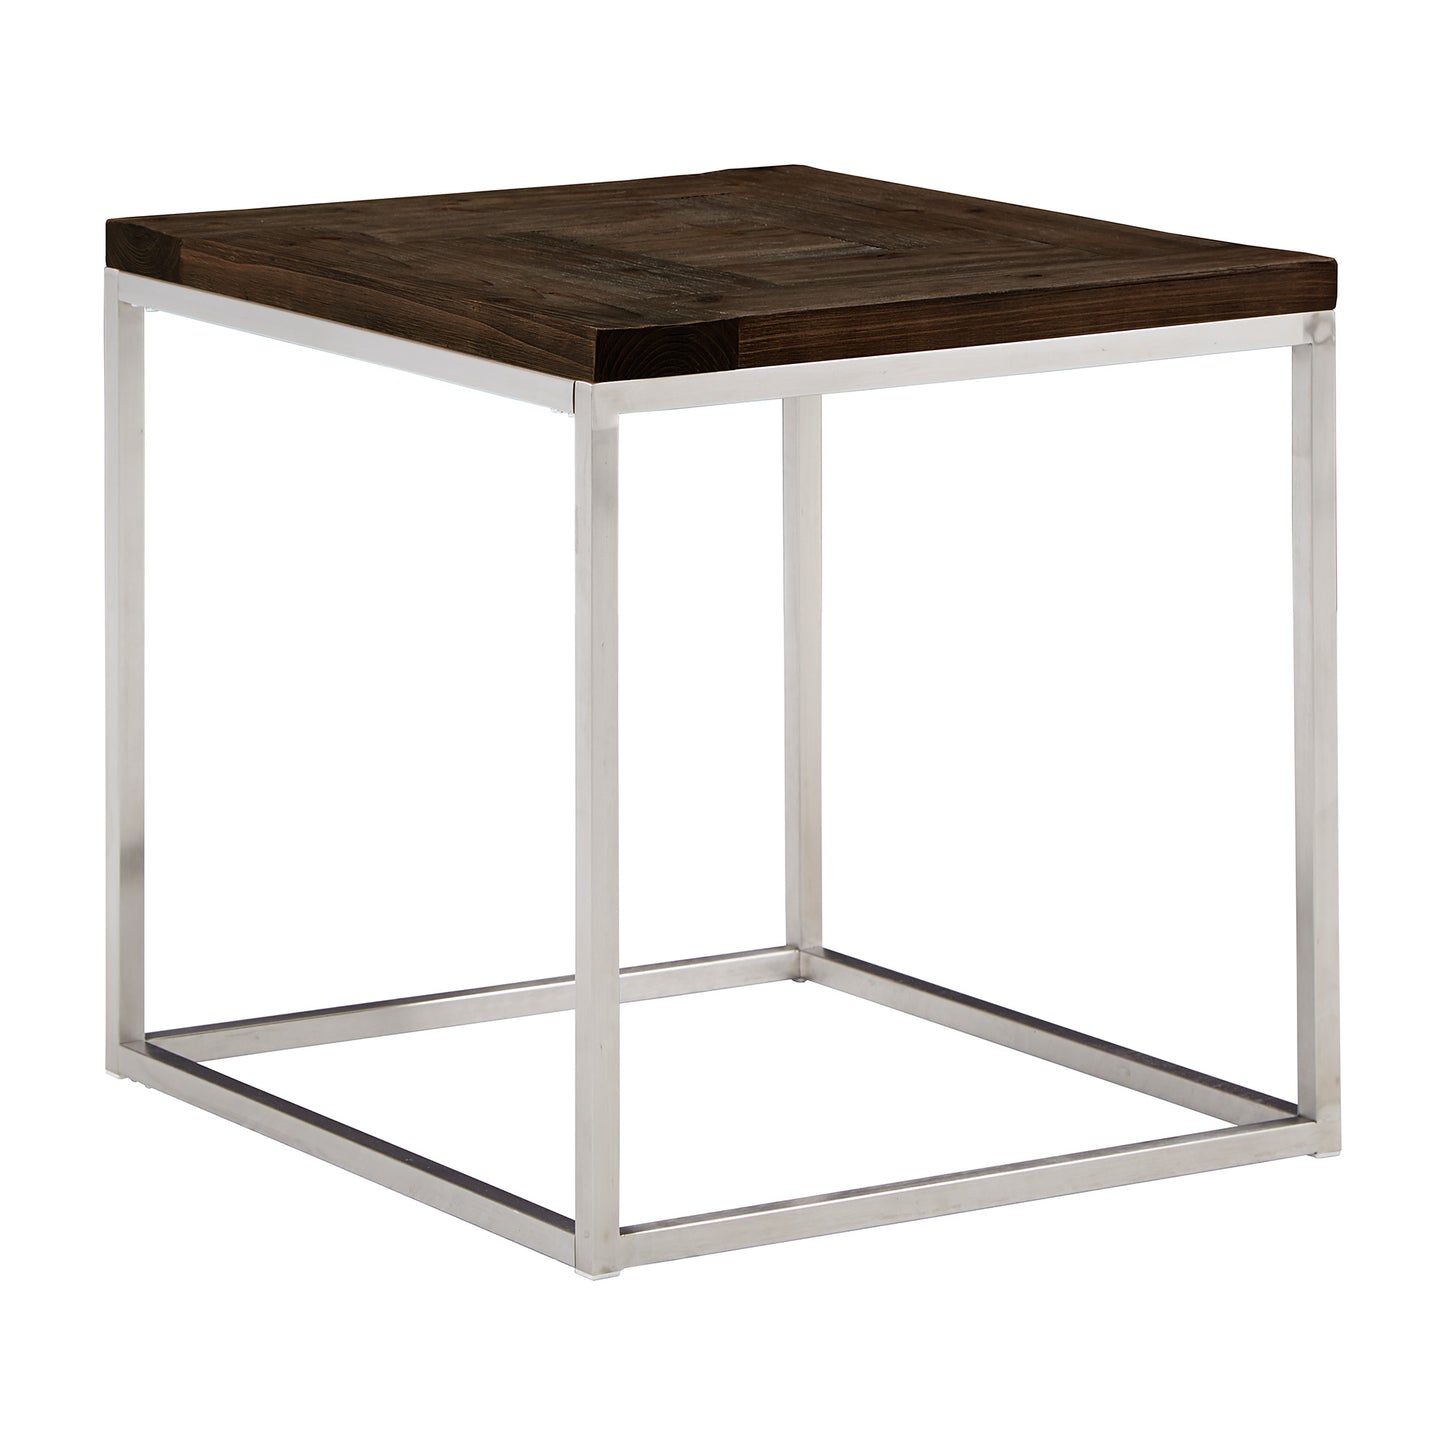 Local Pickup Only - Stainless Steel Rectangular End Table - Brown Finish Top